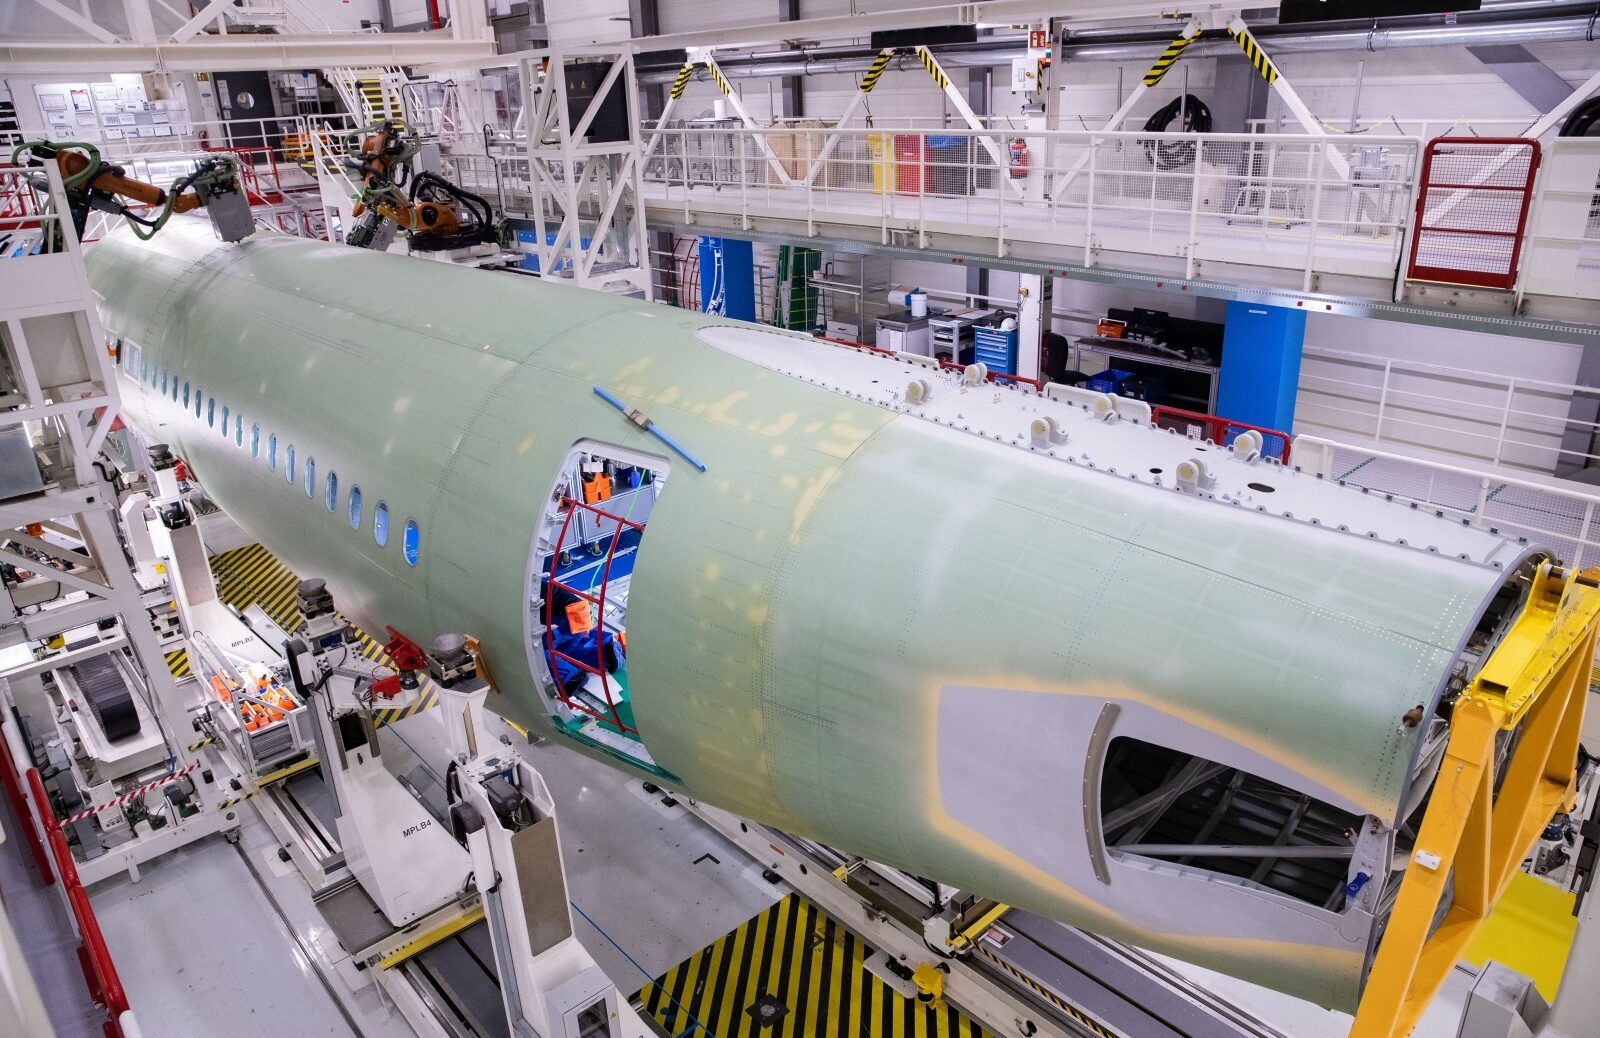 New assembly process for aircraft fuselages at Airbus